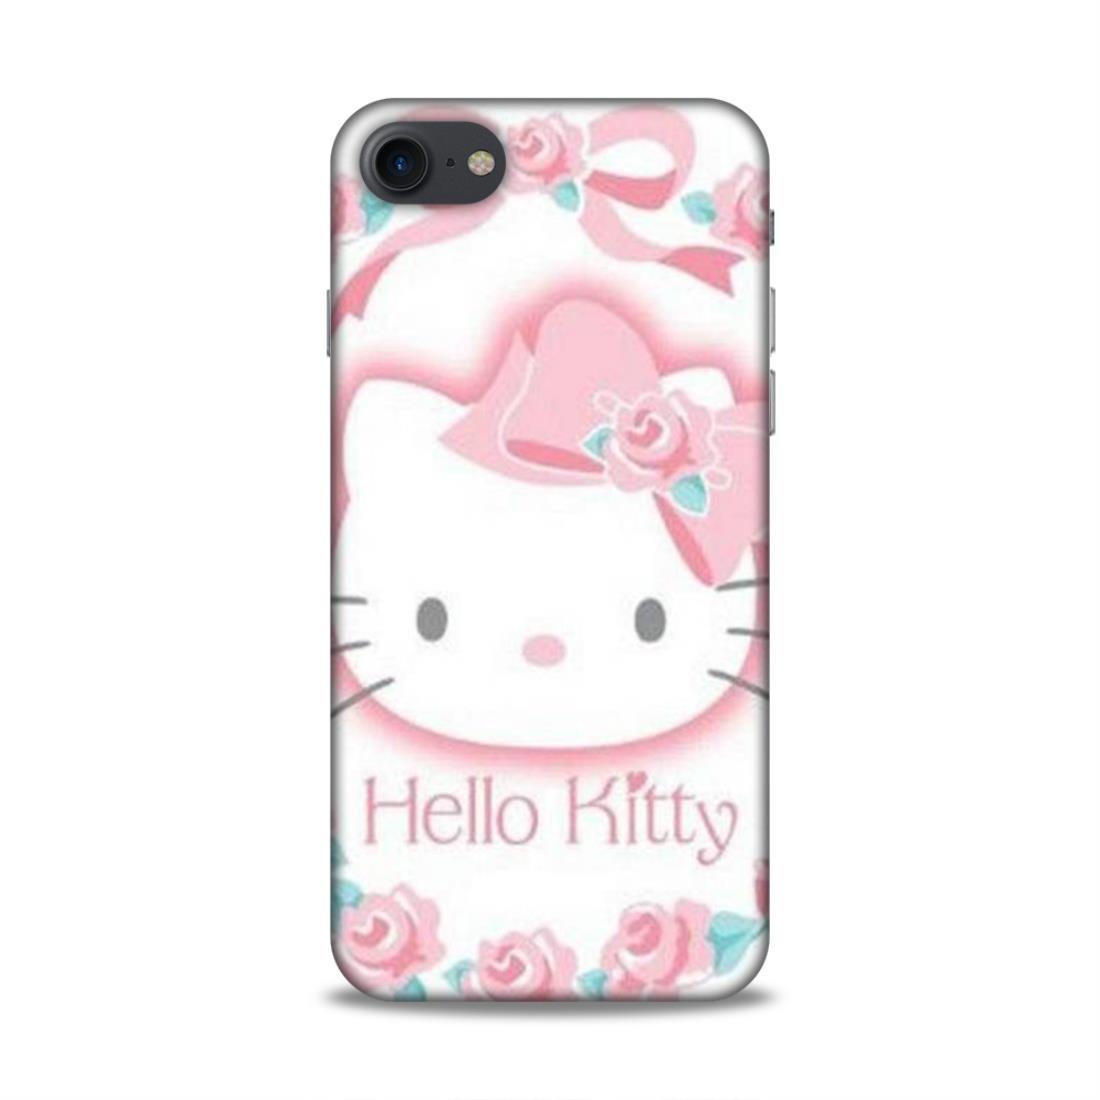 Hellow Kitty Pink iPhone 7 Phone Cover Case